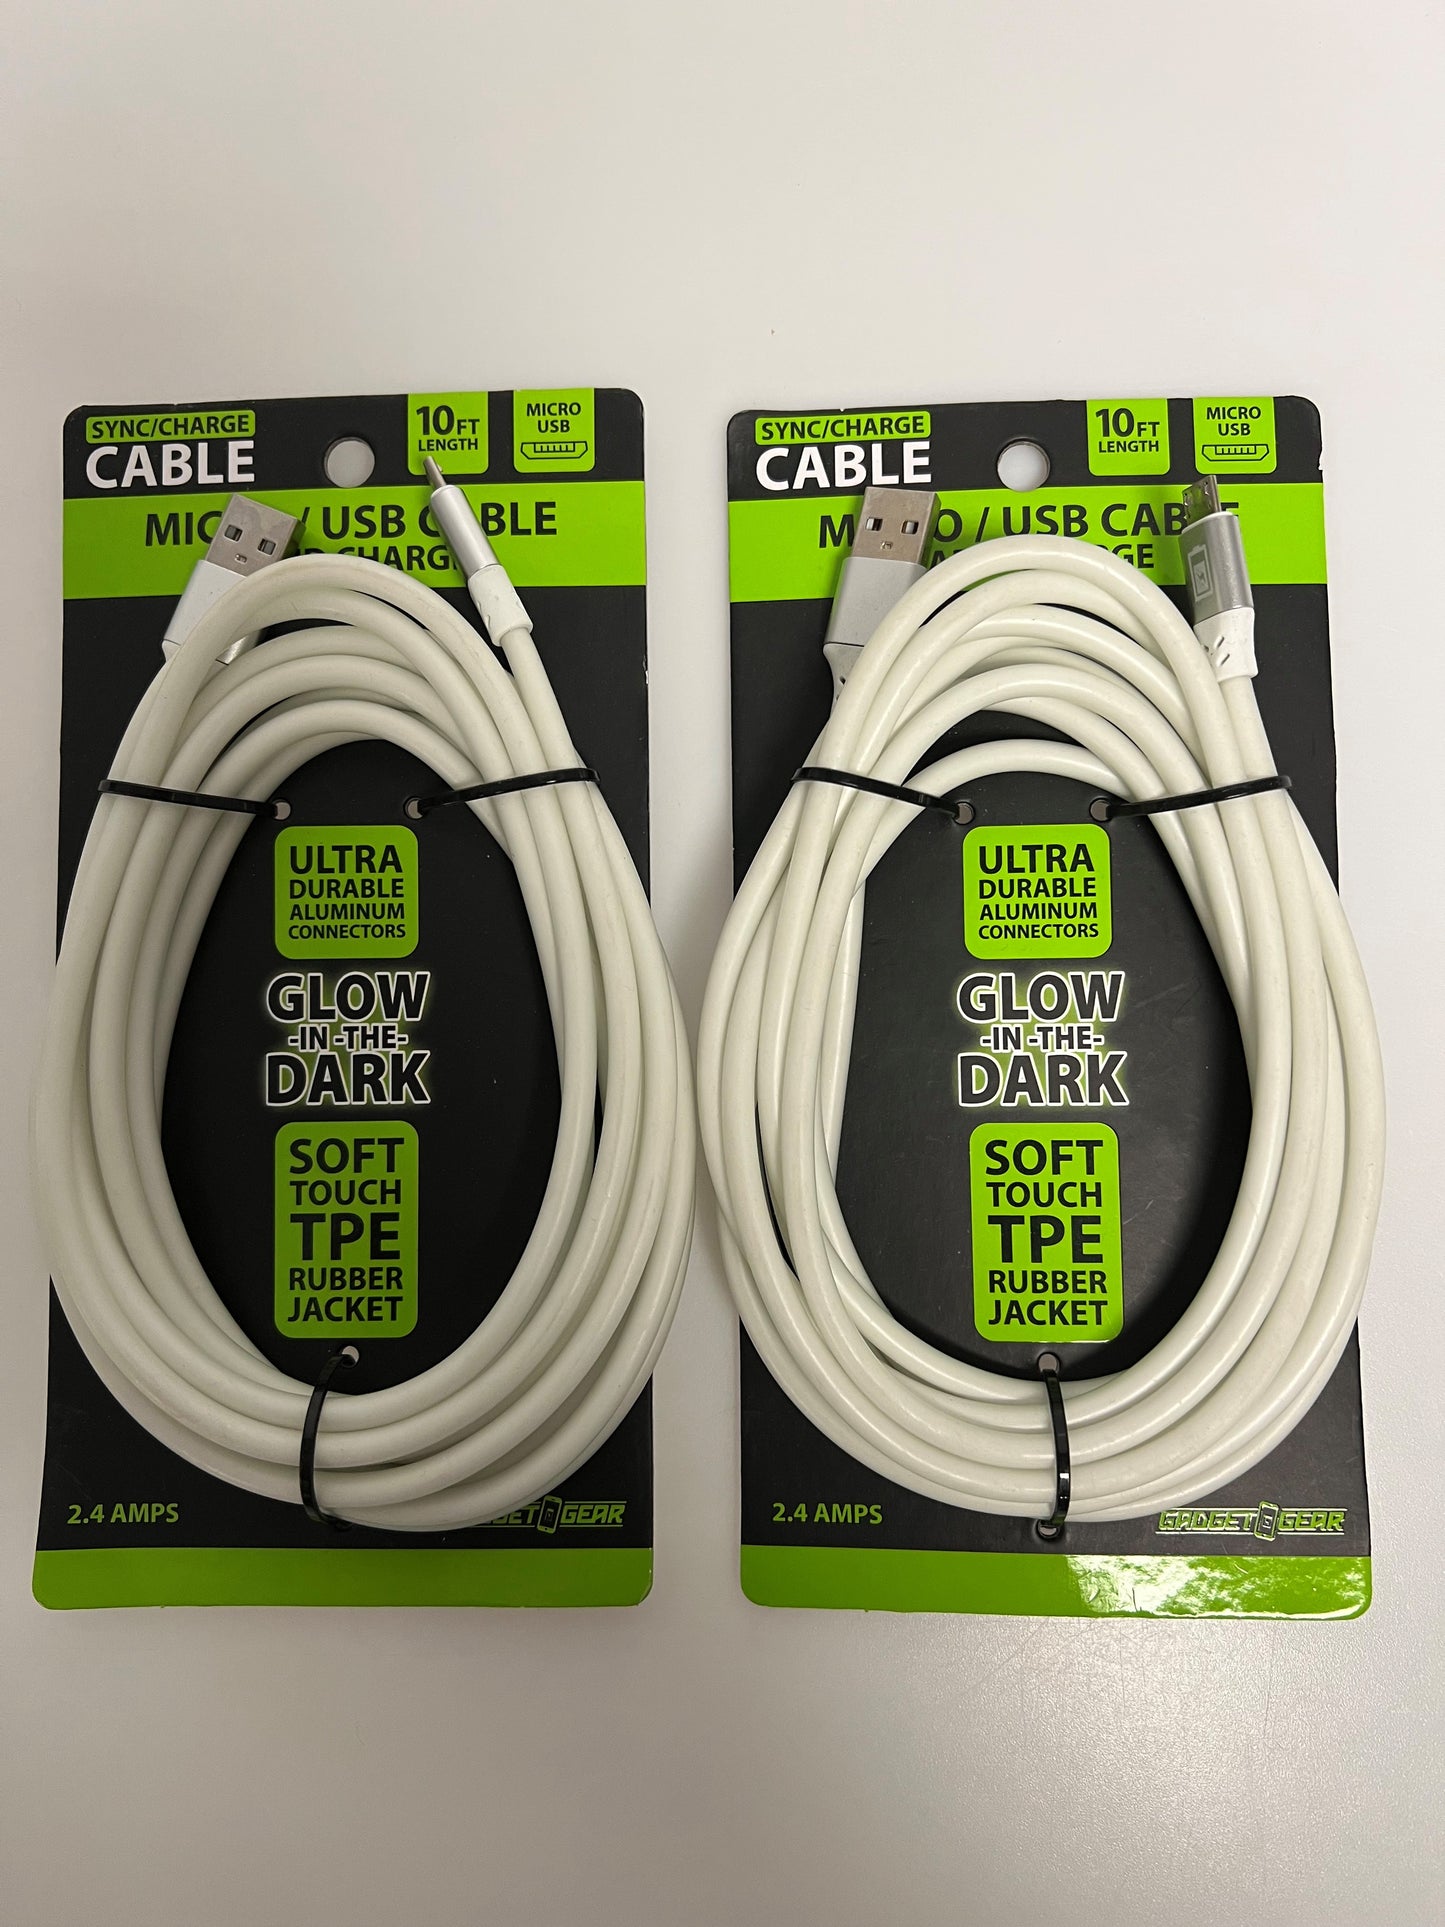 ITEM NUMBER 022423L 10FT GID TPE CABLE MICRO - STORE SURPLUS NO DISPLAY  1 PIECES PER PACK